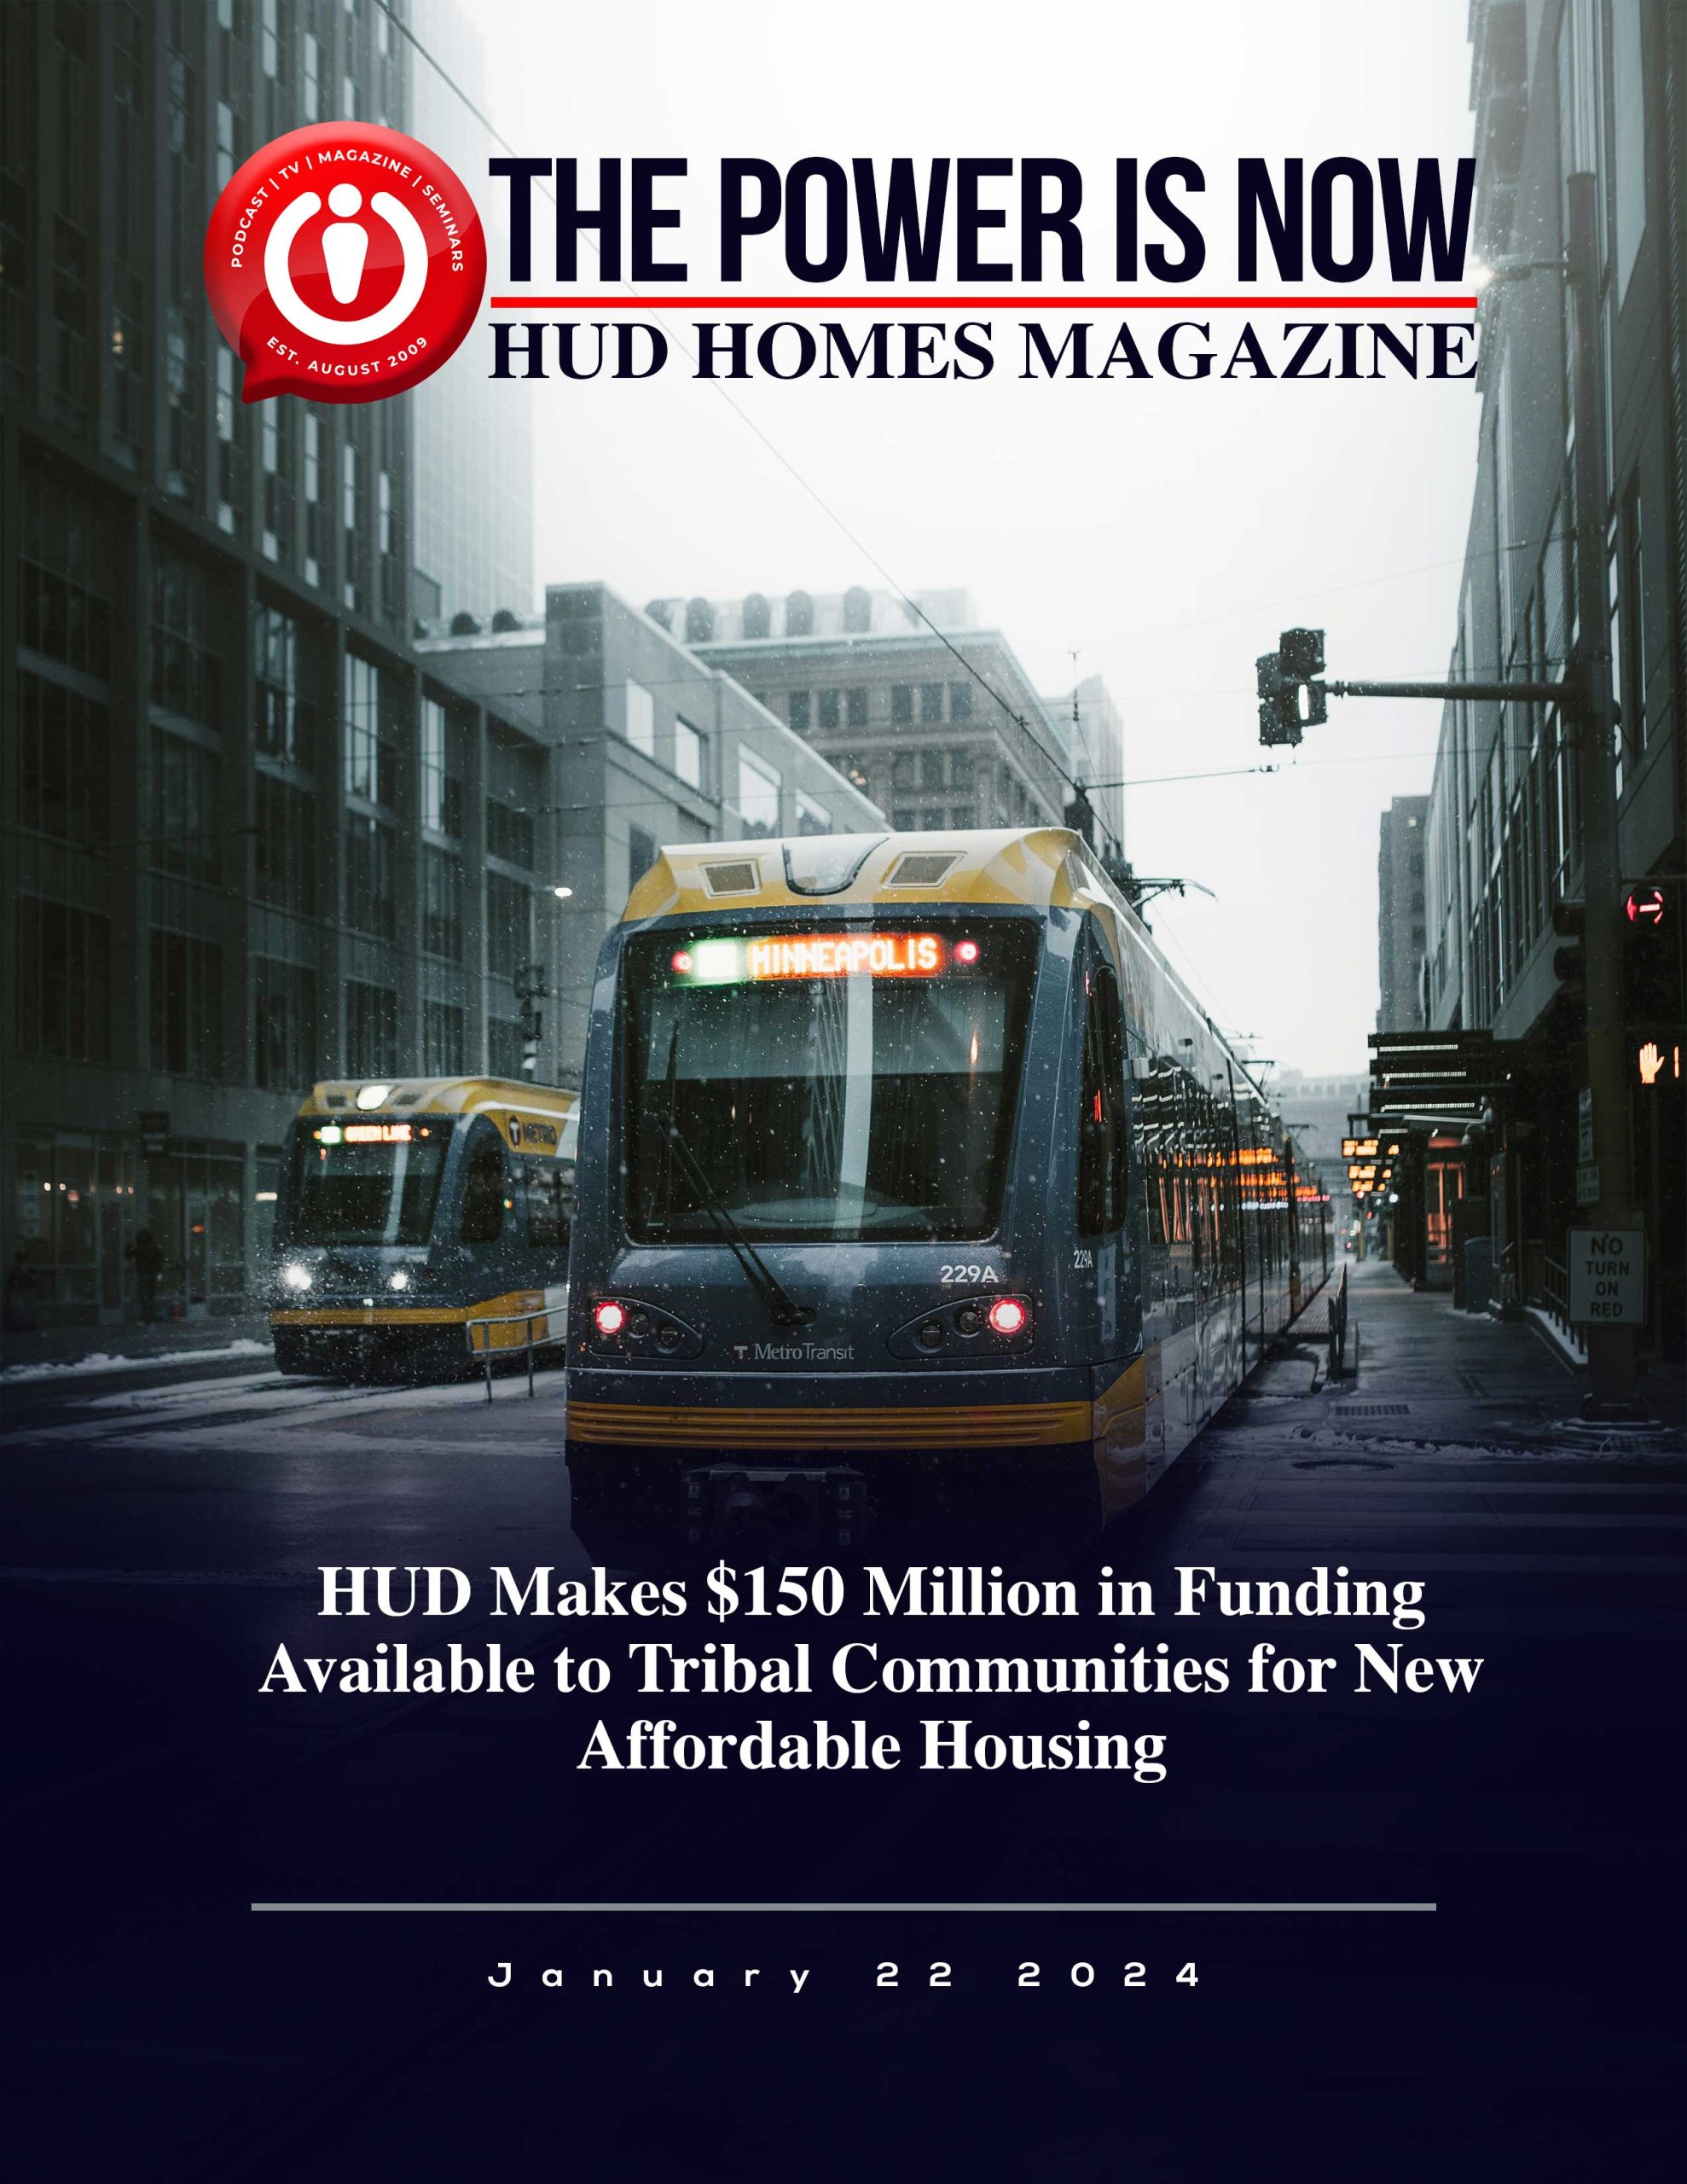 The Power Is Now HUD Home Magazine: affordable housing